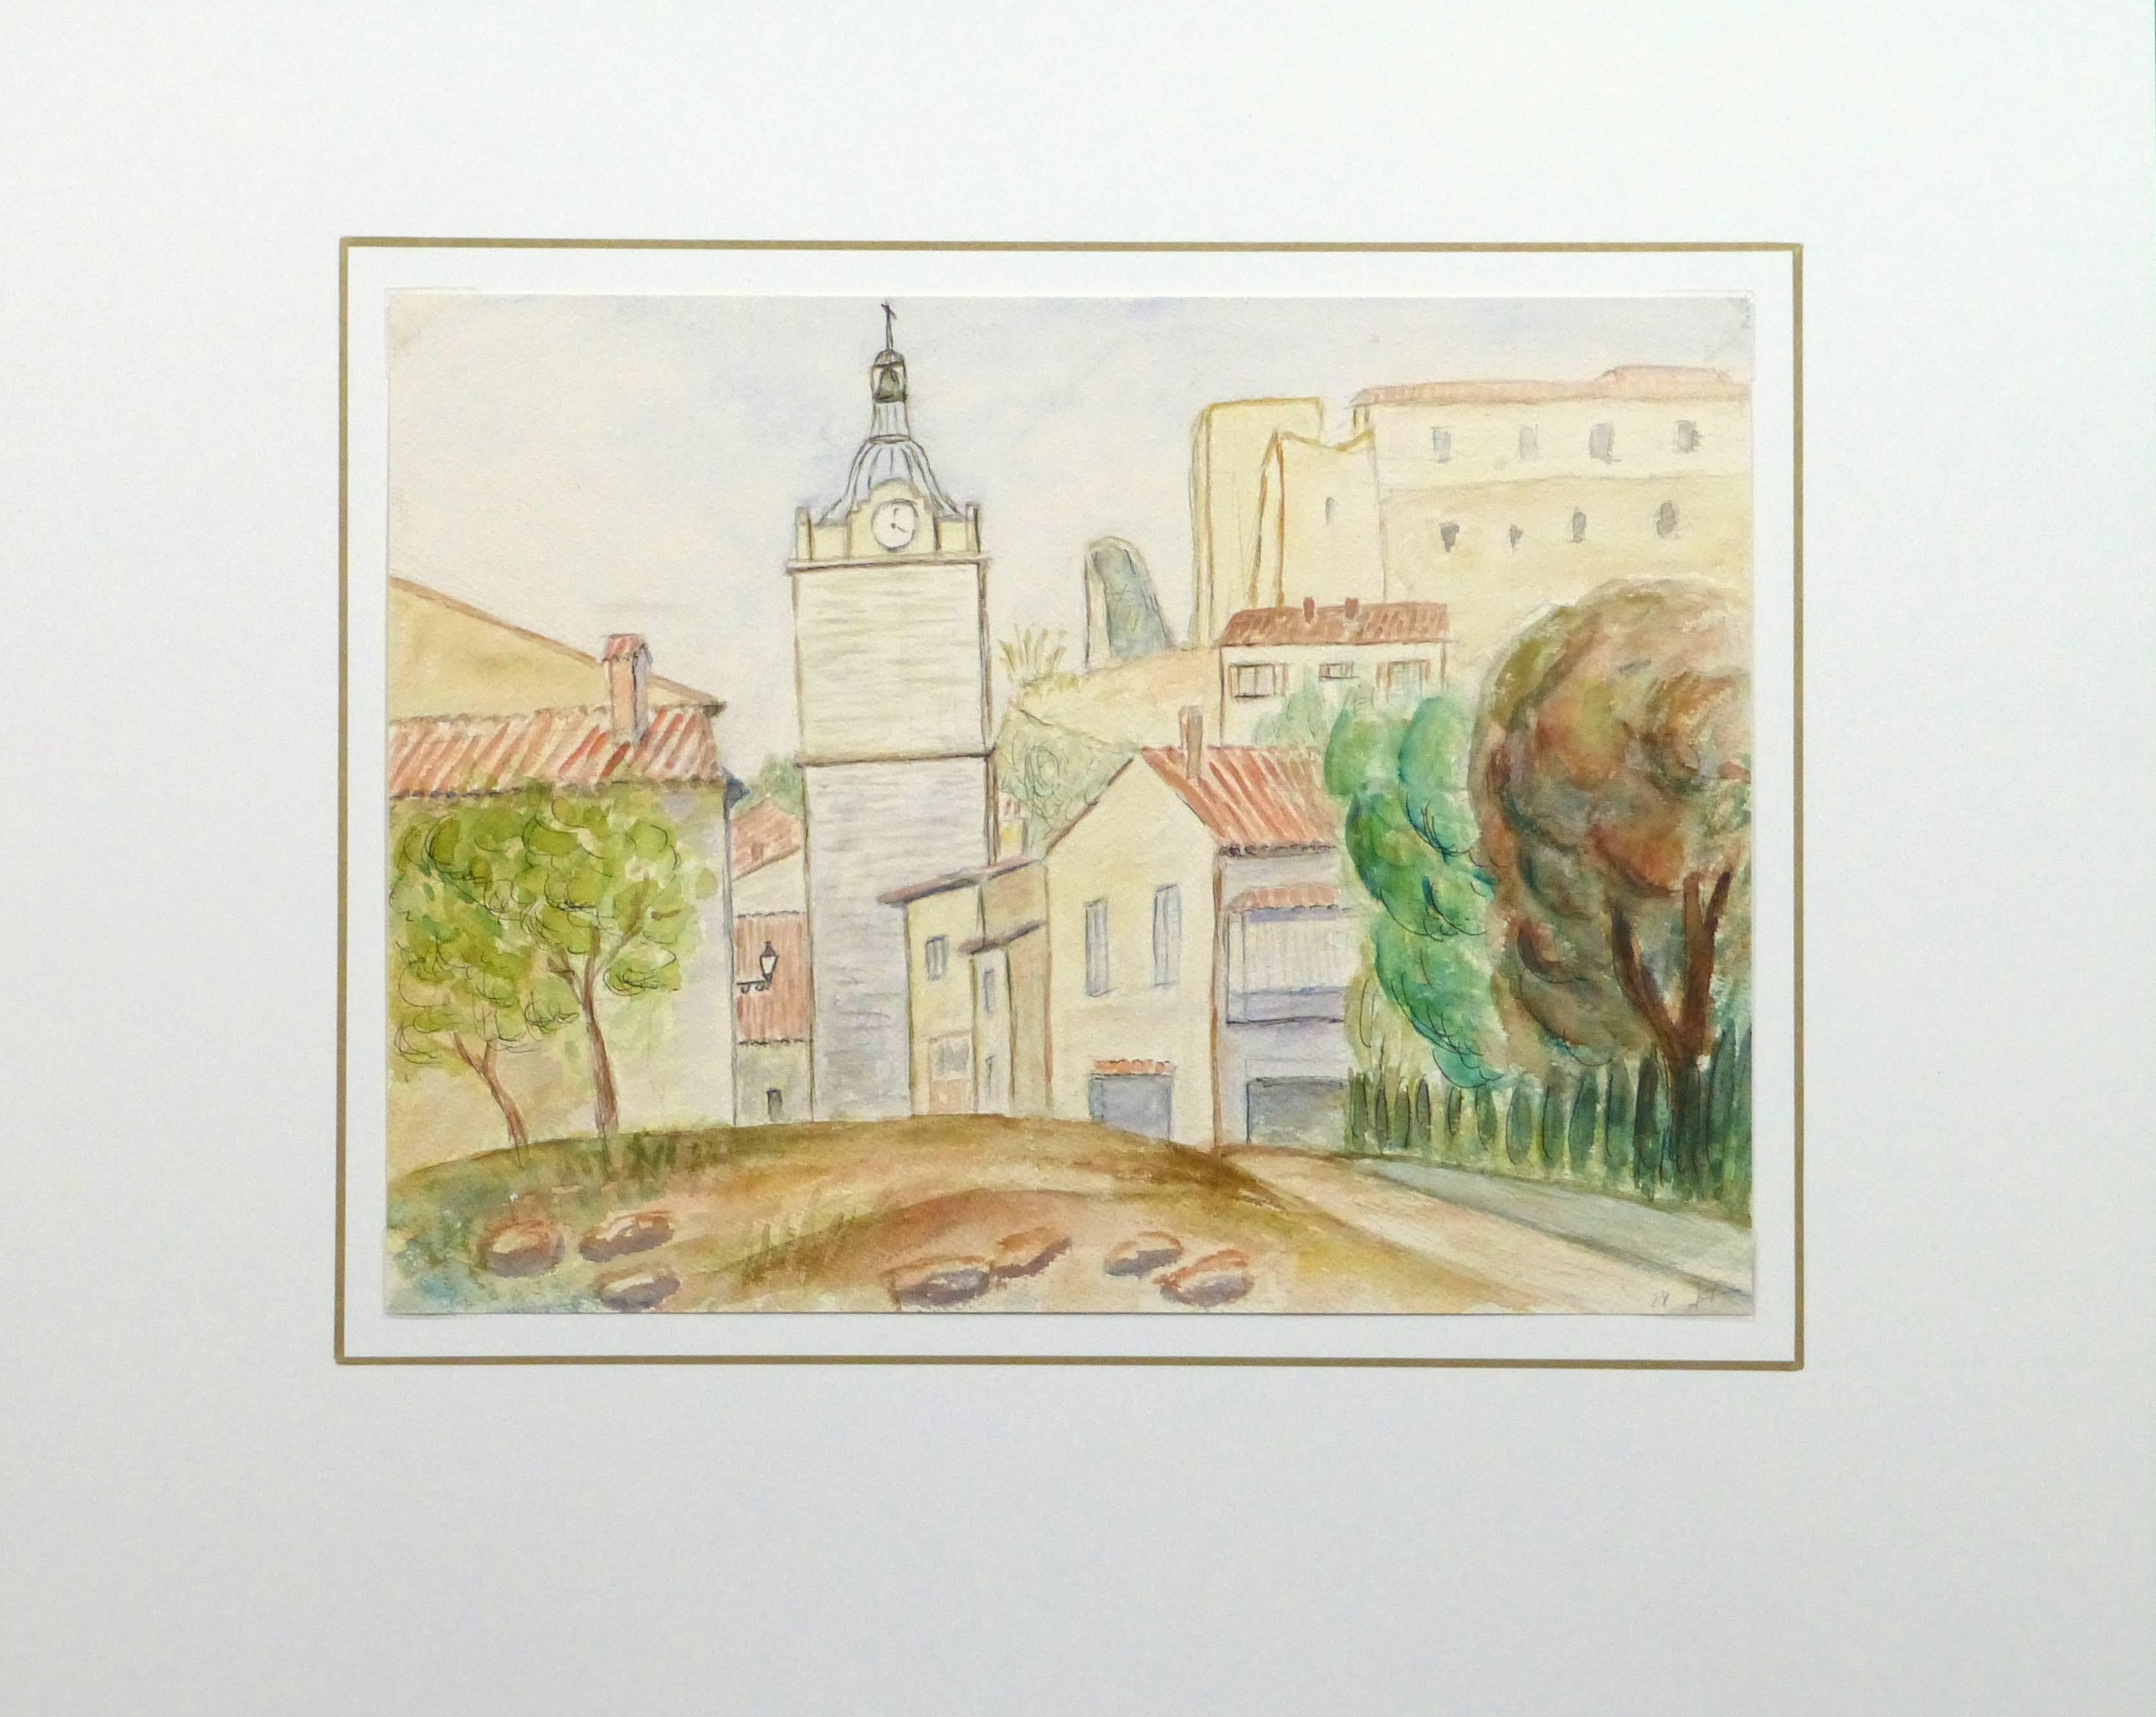 Cheerful and sunny French watercolor of a small town with a prominent clock tower by artist A. Guillaume, 1979. Dated and signed lower right.

Original artwork on paper displayed on a white mat with a gold border. Mat fits a standard-size frame.